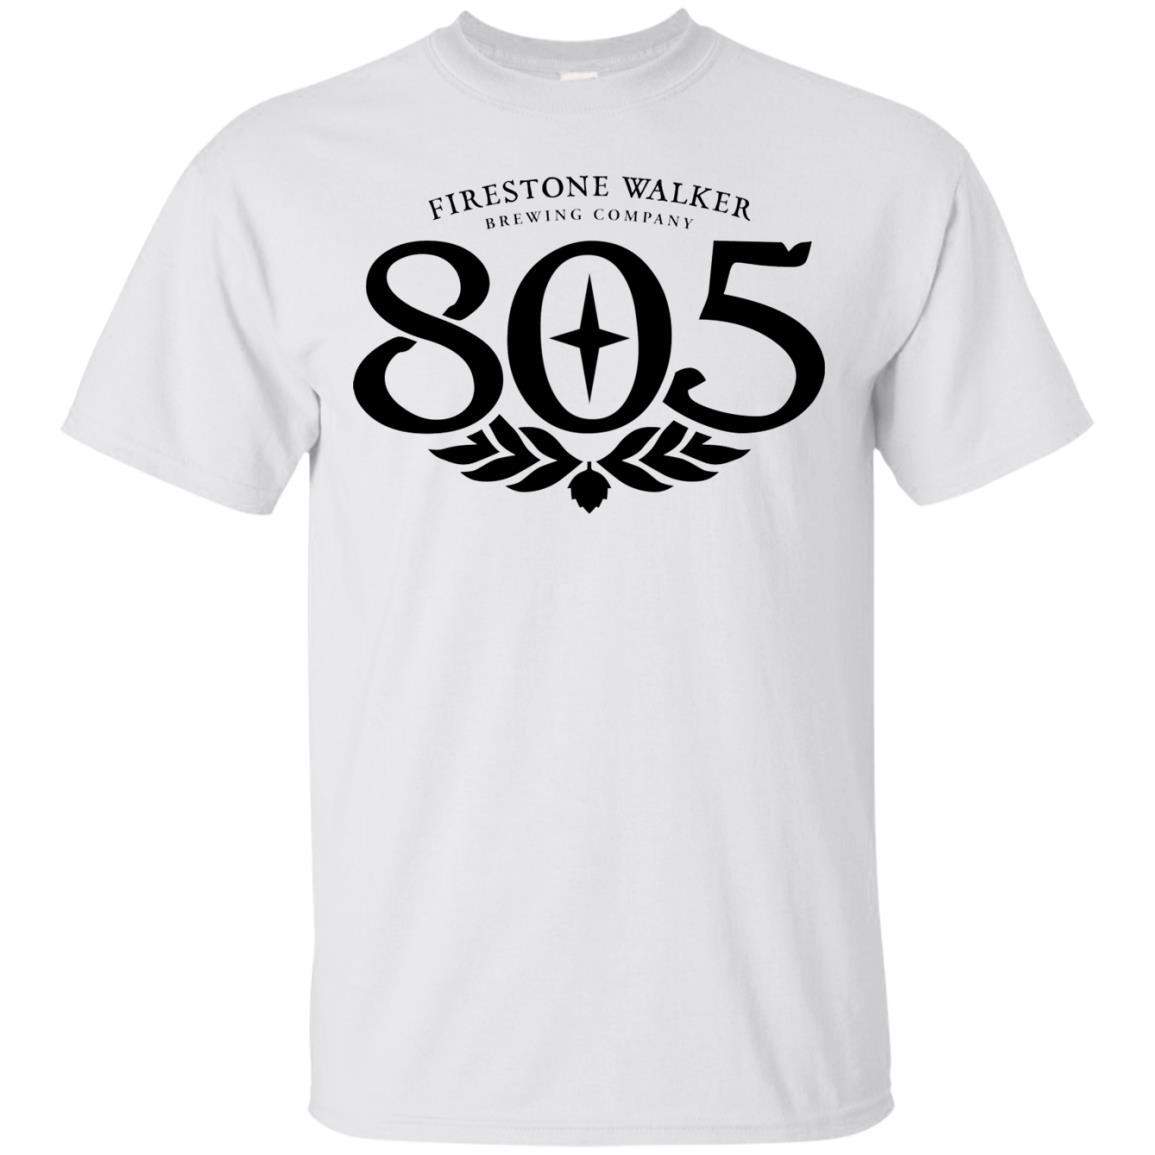 805 Beer Black - T-Shirt Style / Color / Size